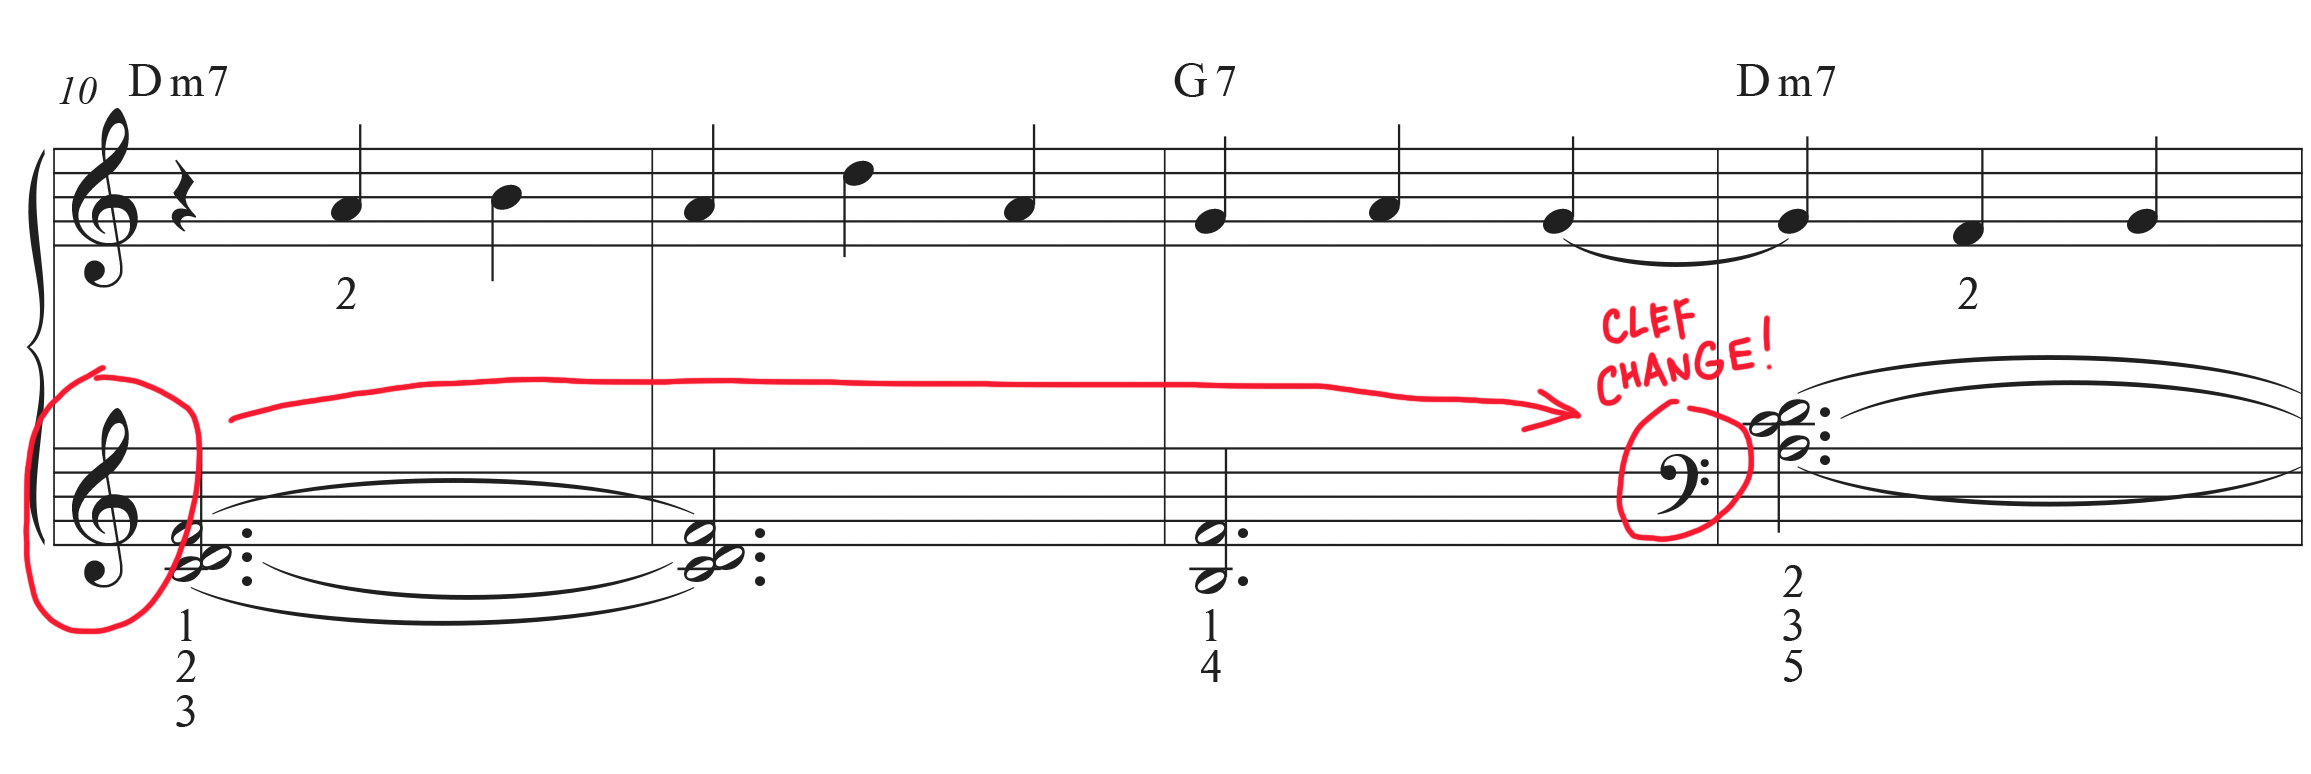 Easy sheet music for Clair de. Lune with clef change in measure 13 highlighted in red.